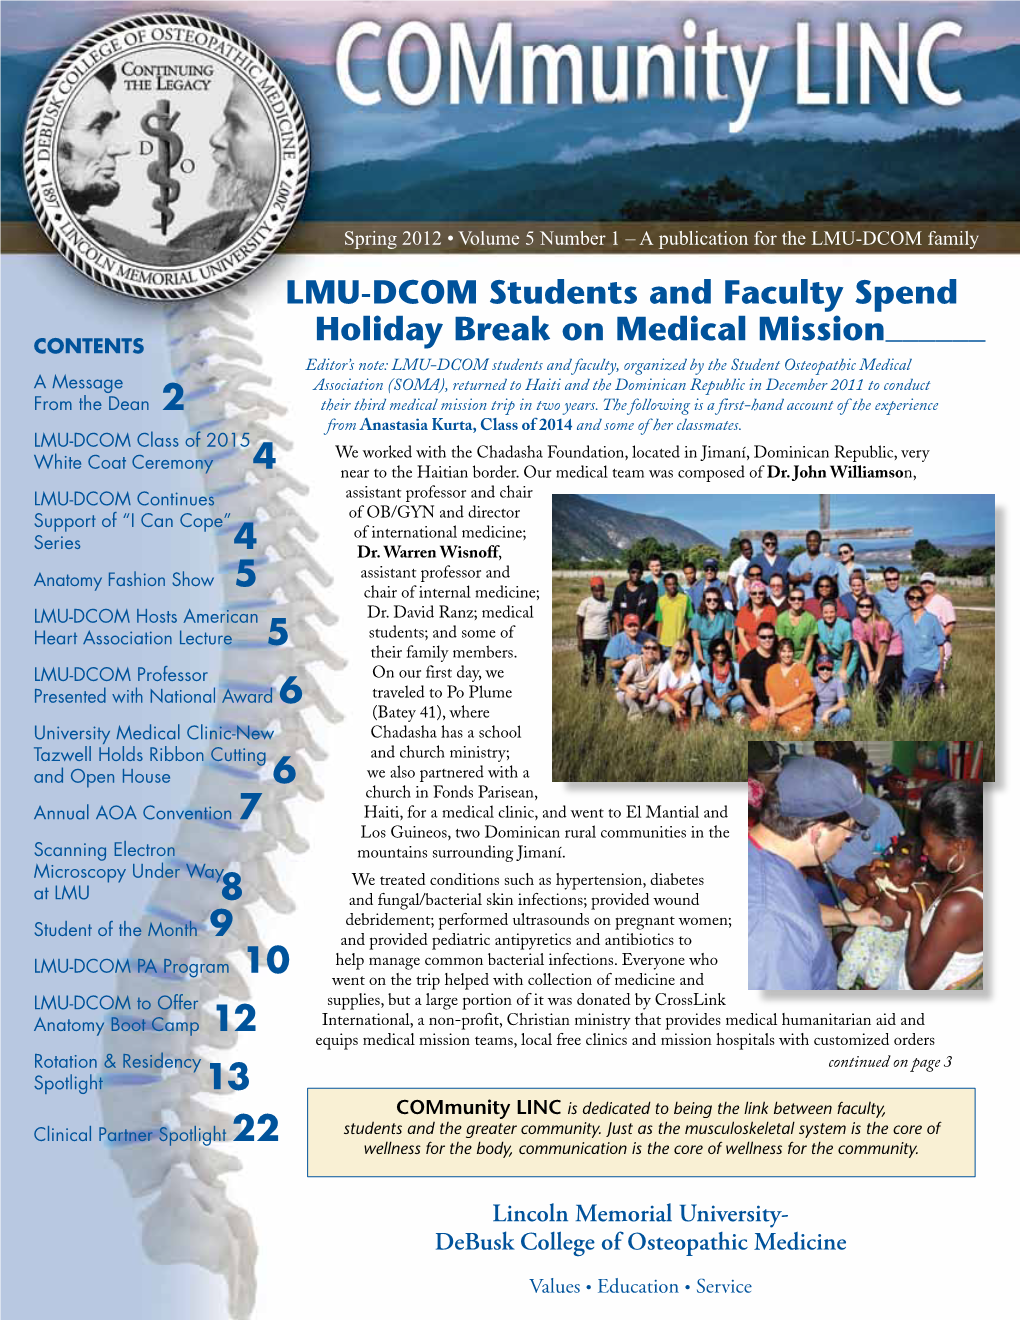 Lmu-Dcom Students and Faculty Spend Holiday Break on Medical Mission___